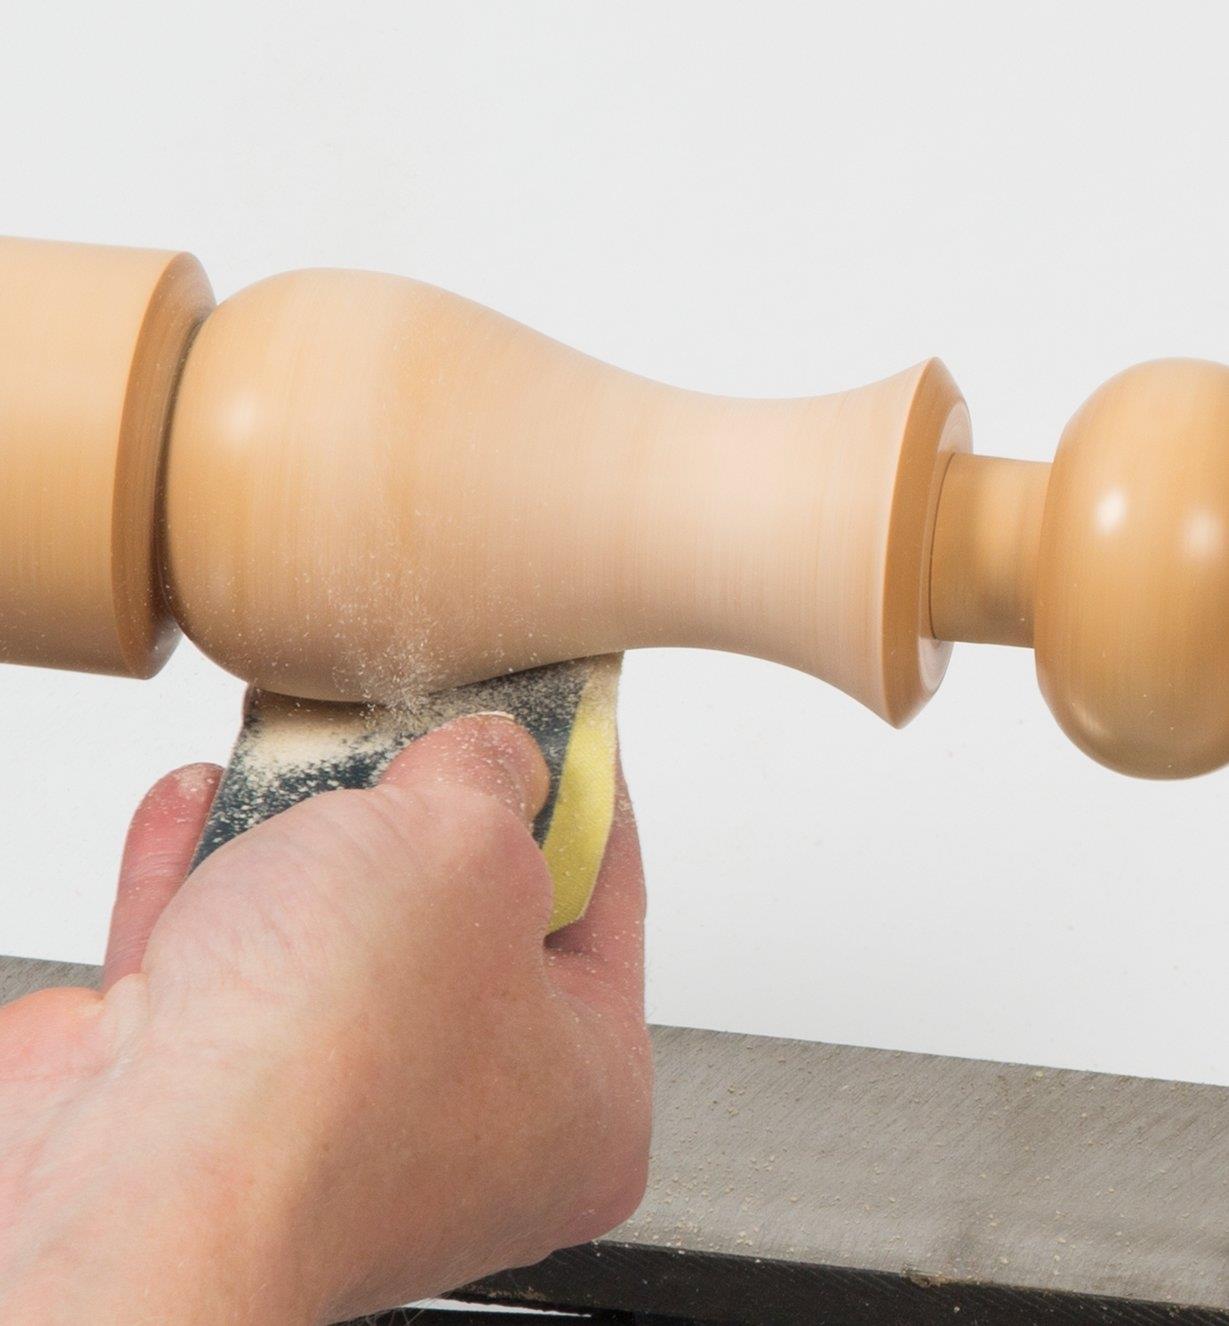 Sanding a spindle on the lathe